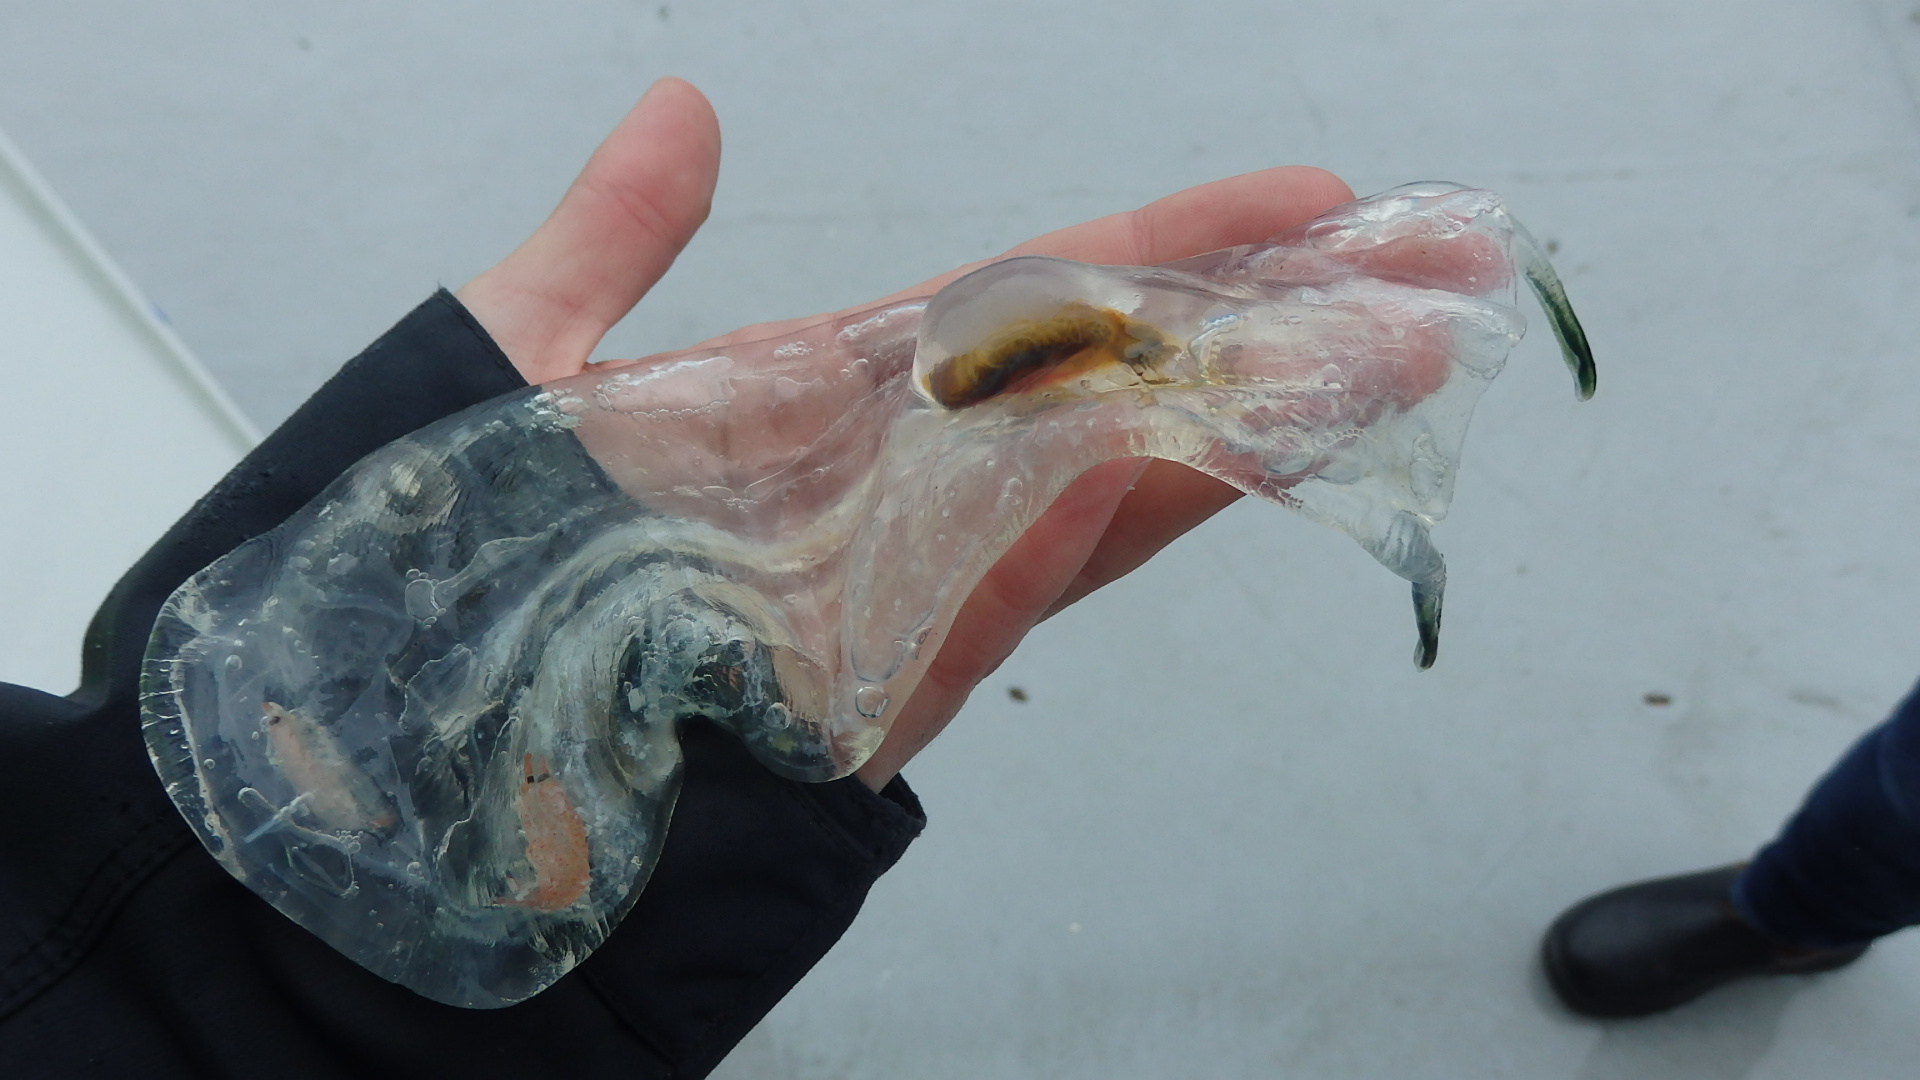 A salp displays its recent meal of small prawns. Image: Max McGuire.